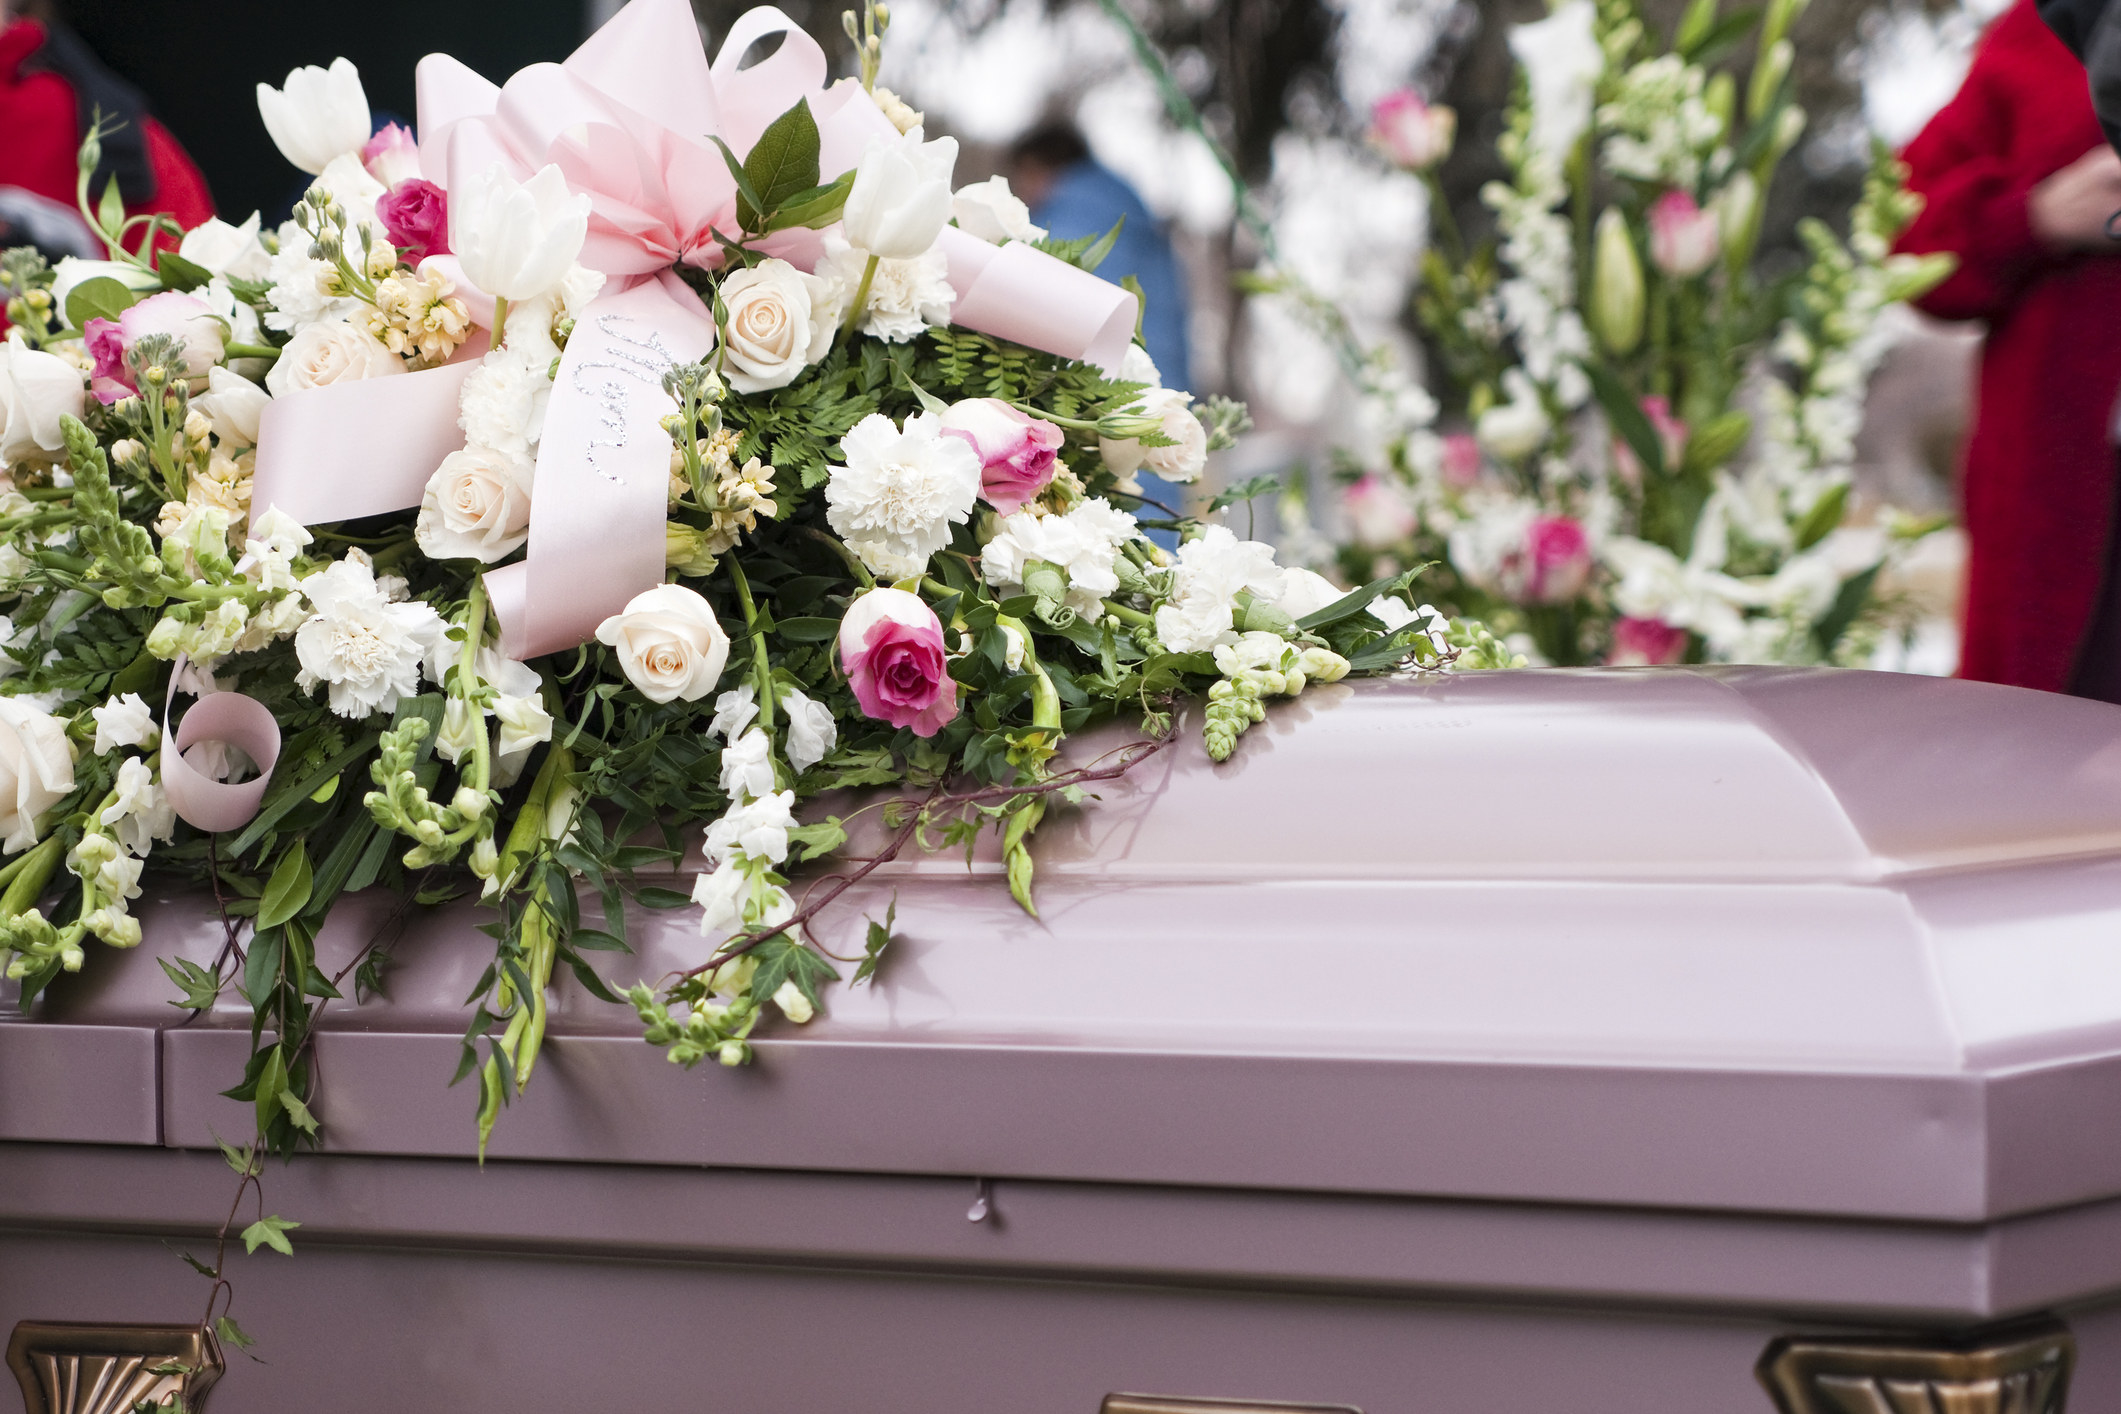 a casket with flowers on it